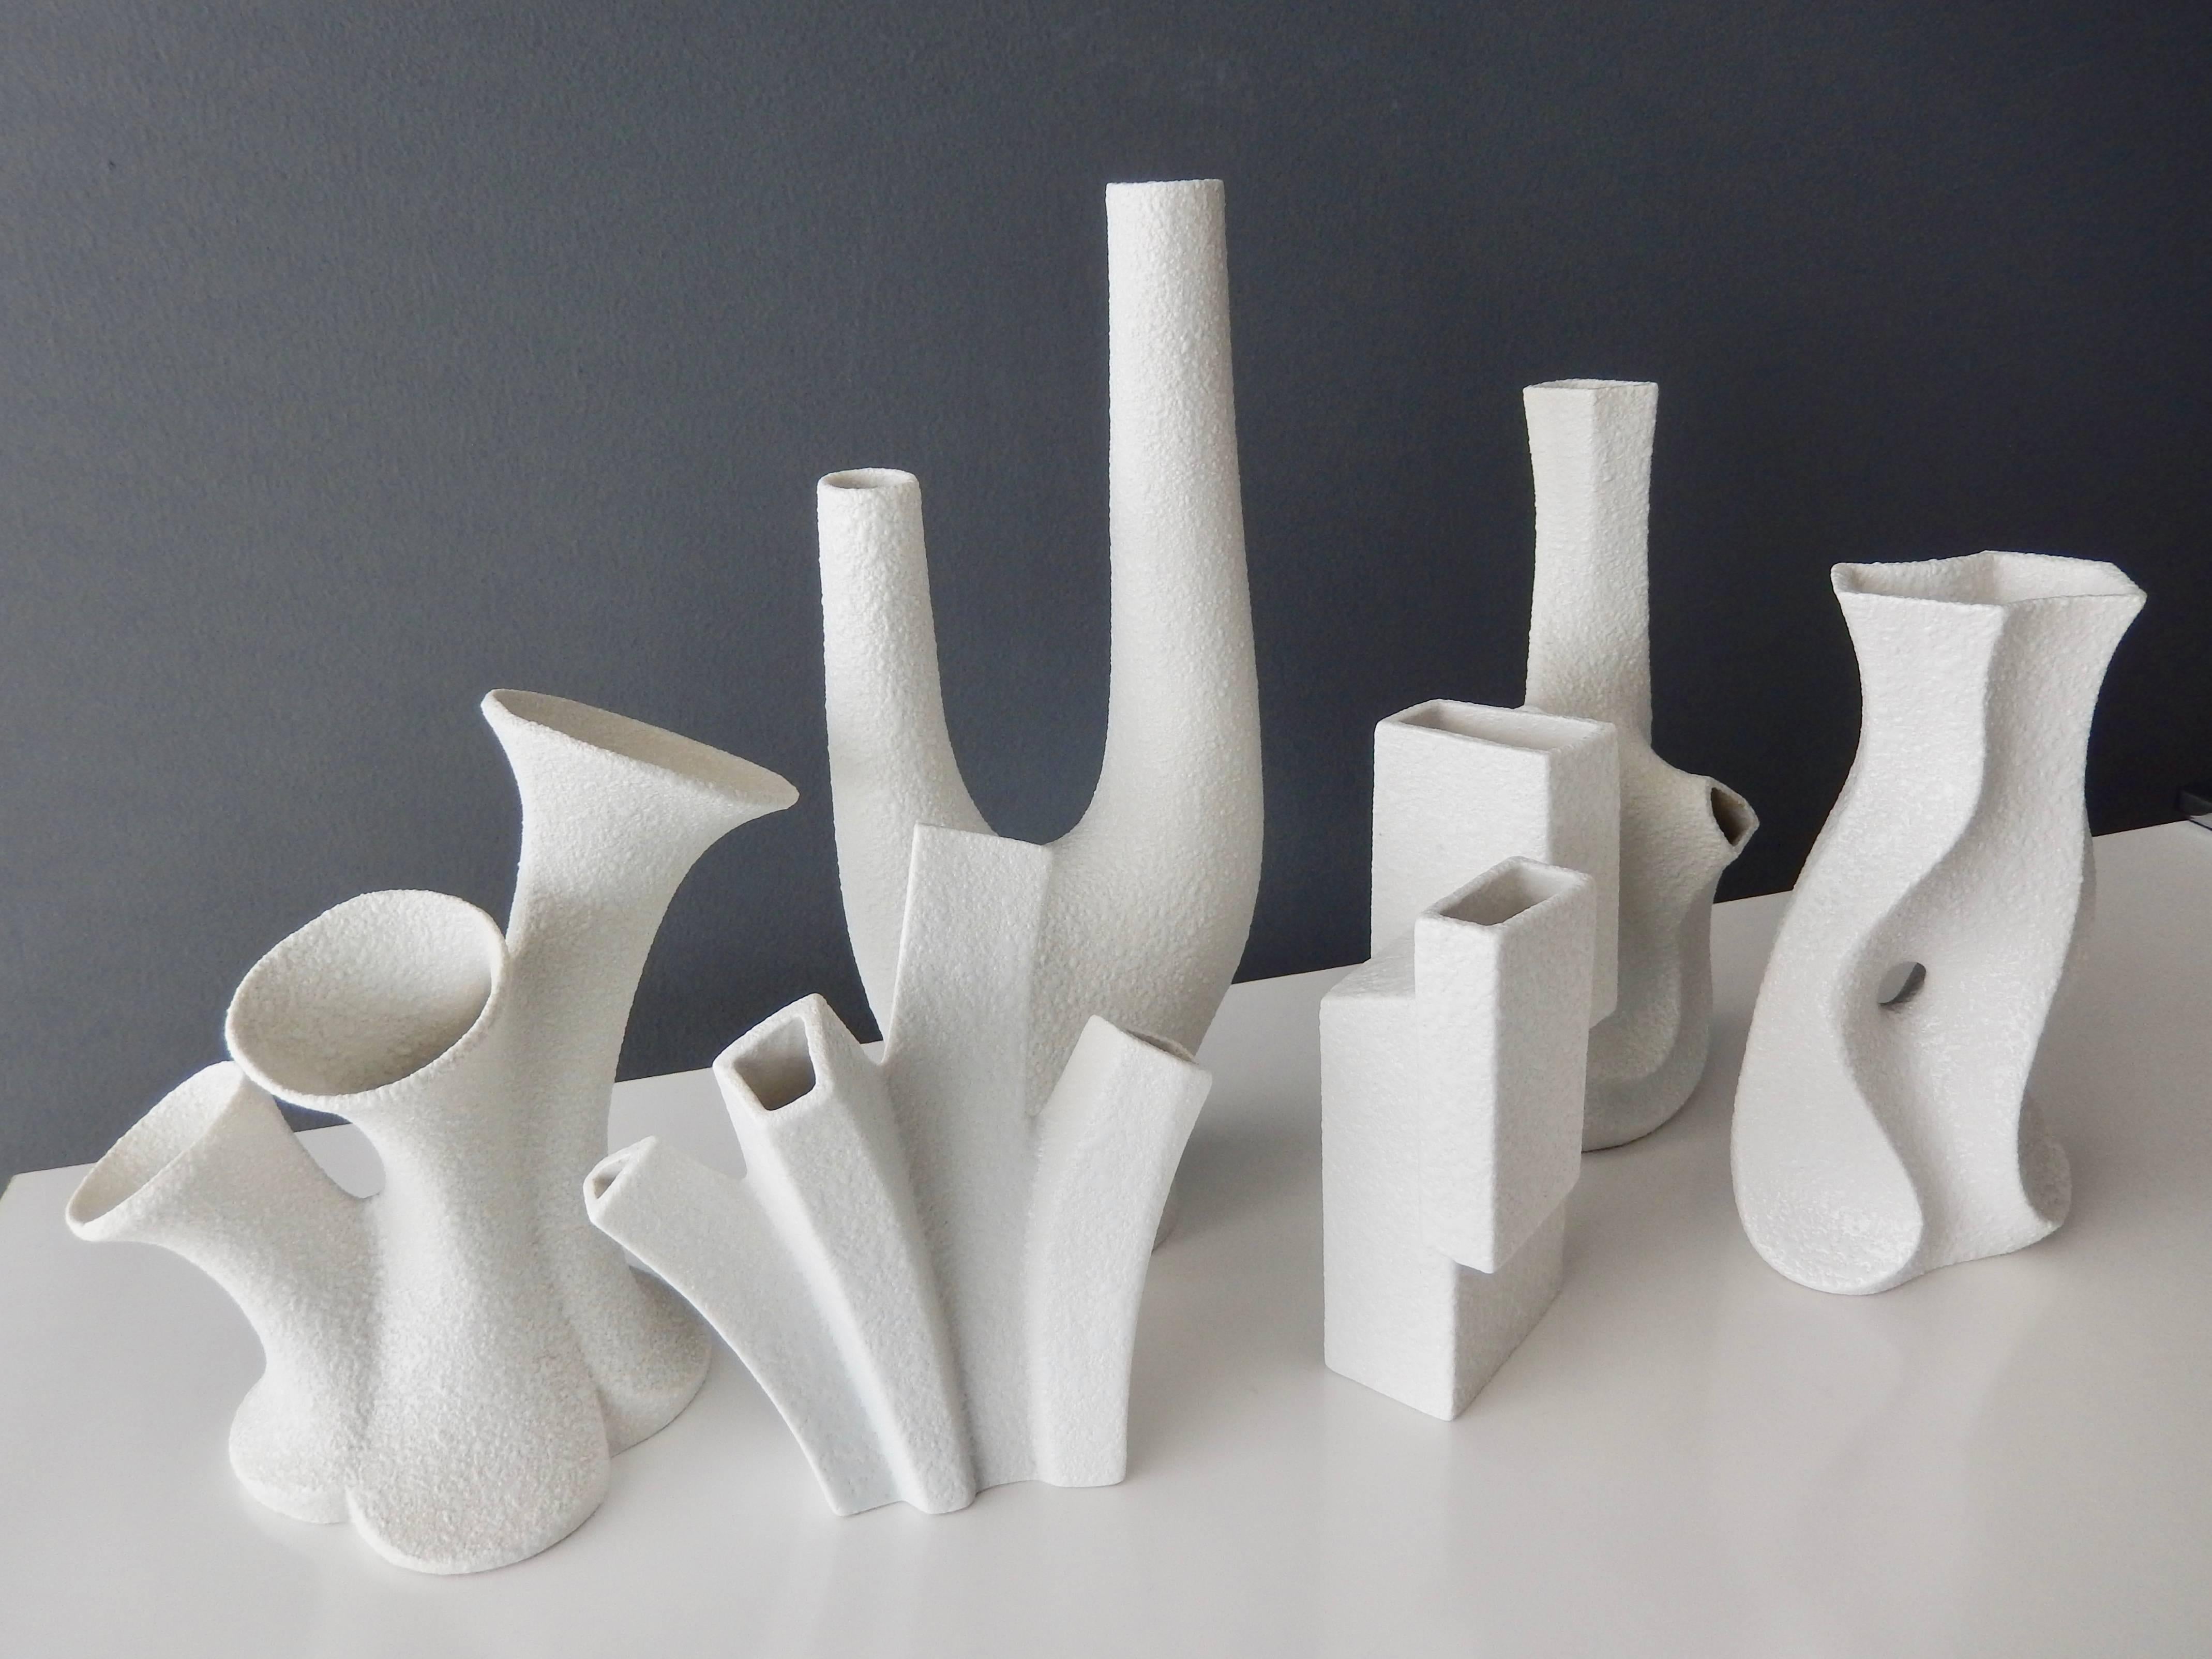 A group of six white porcelain vases by the innovative designer Peter Muller for Sgrafo Modern of West Germany.

In 1955 two brothers, Peter and Klaus Muller opened a small porcelain factory in Germany and created some of the most modern,